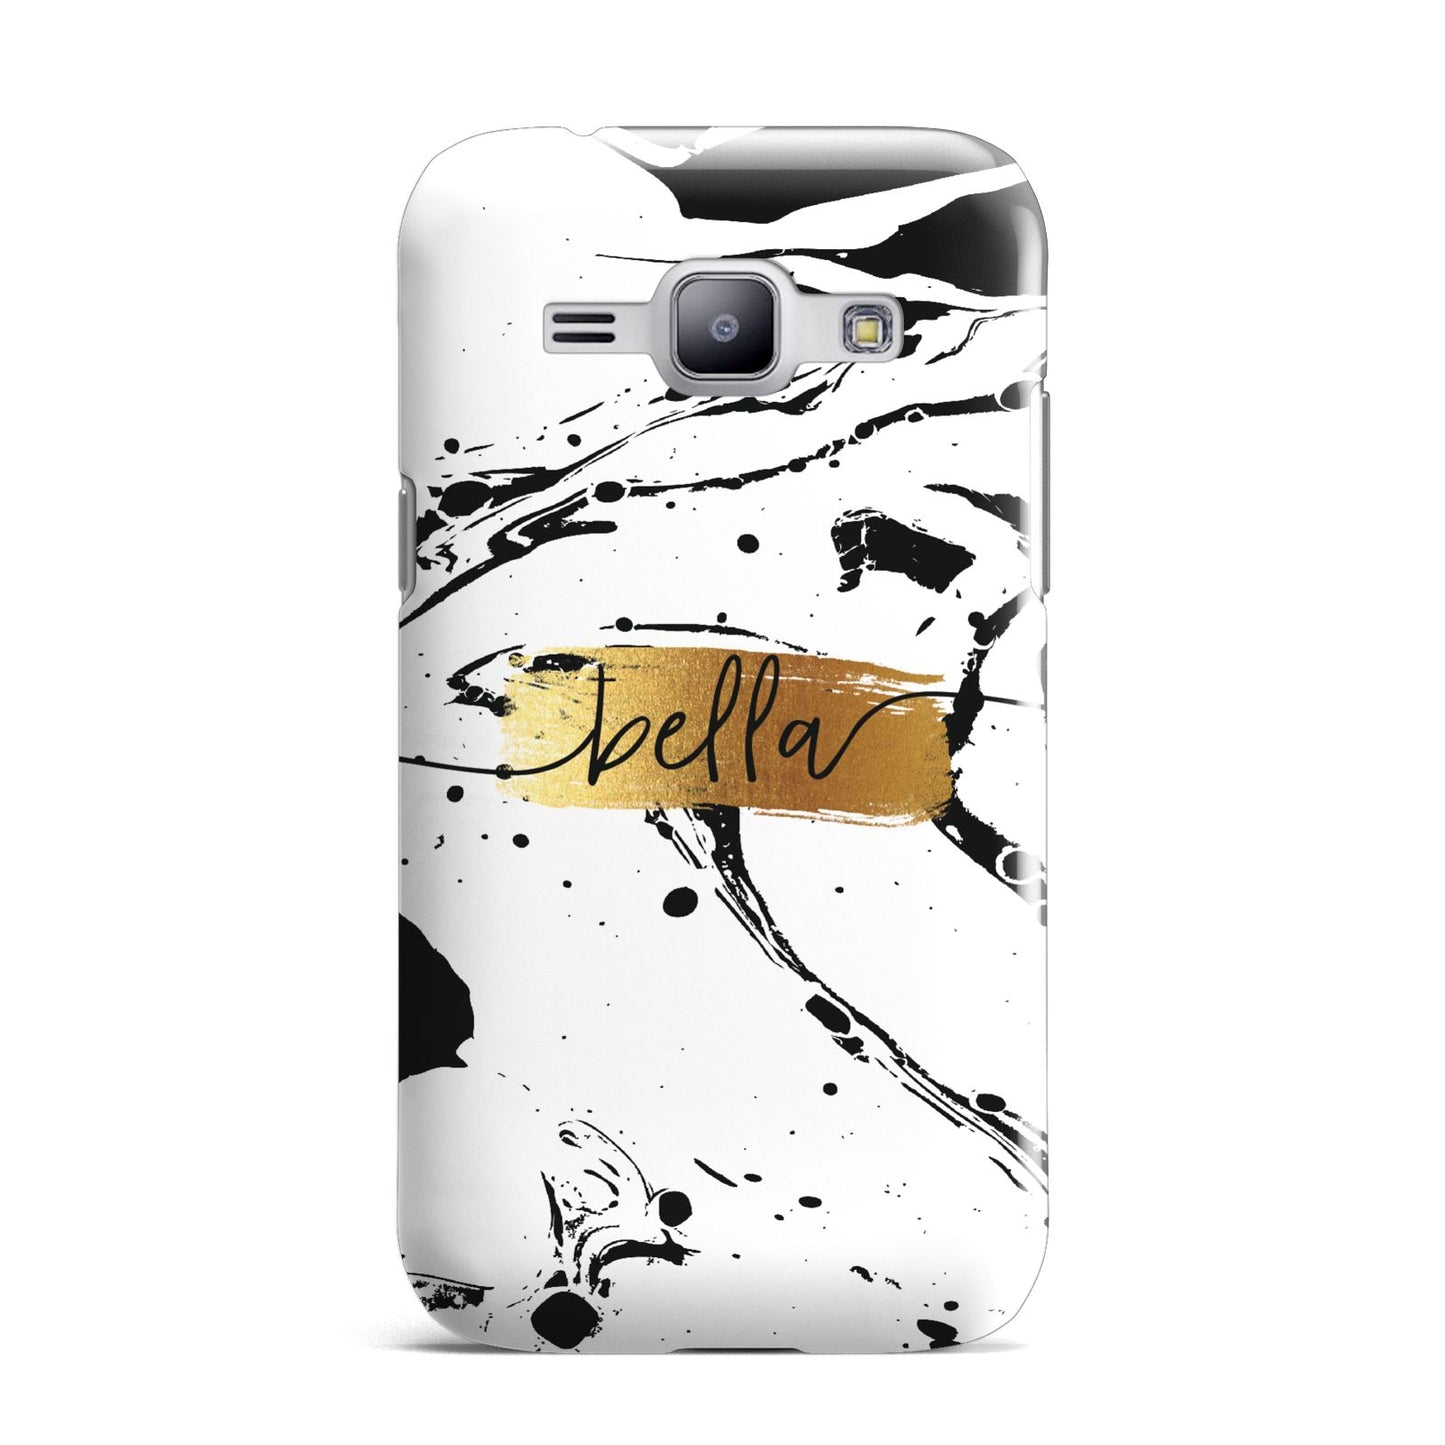 Personalised White Gold Swirl Marble Samsung Galaxy J1 2015 Case